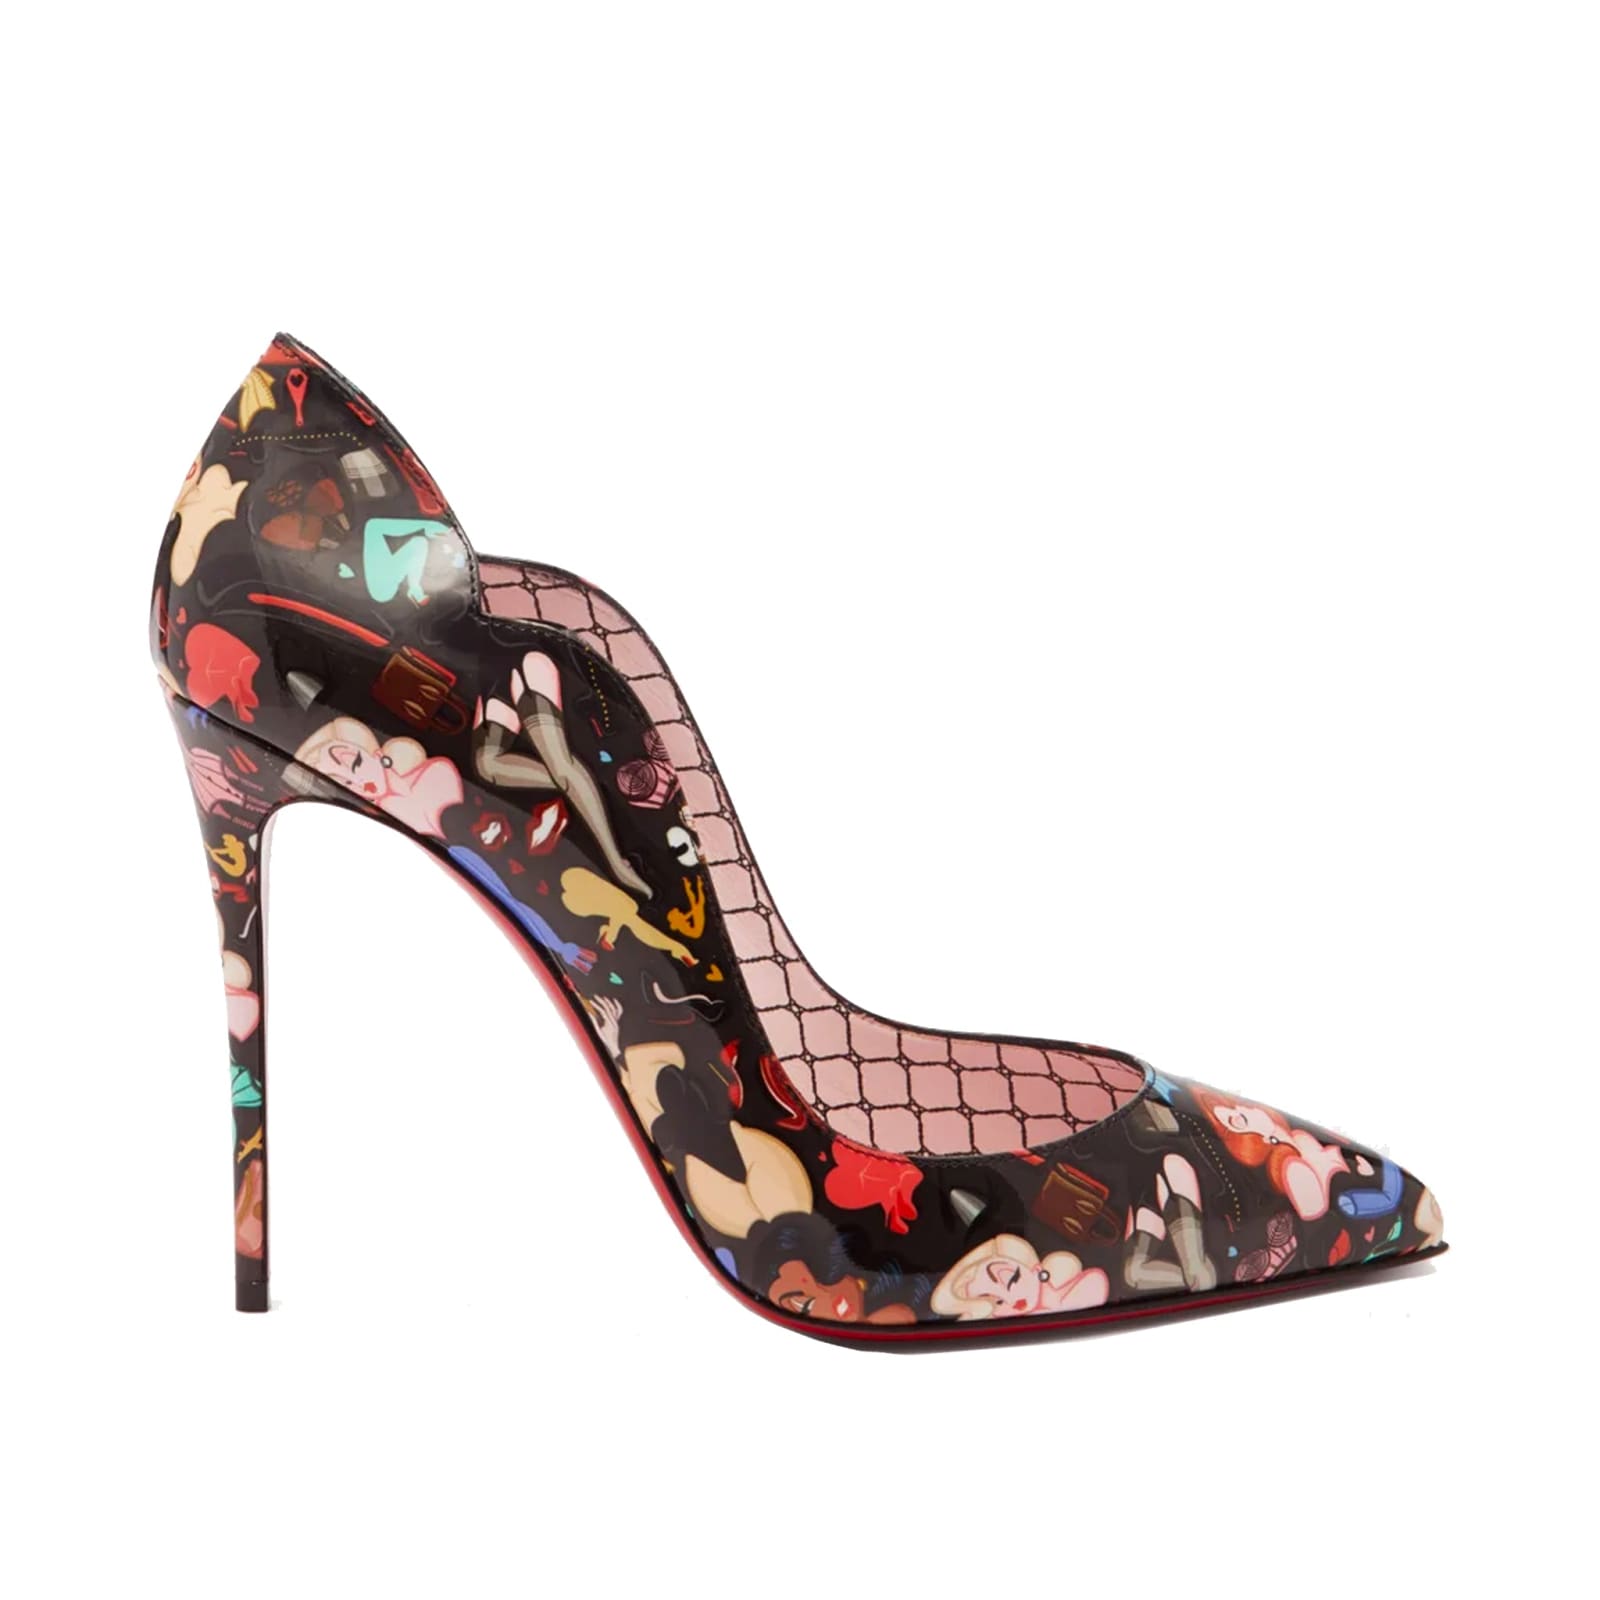 Christian Louboutin Printed Leather Pumps